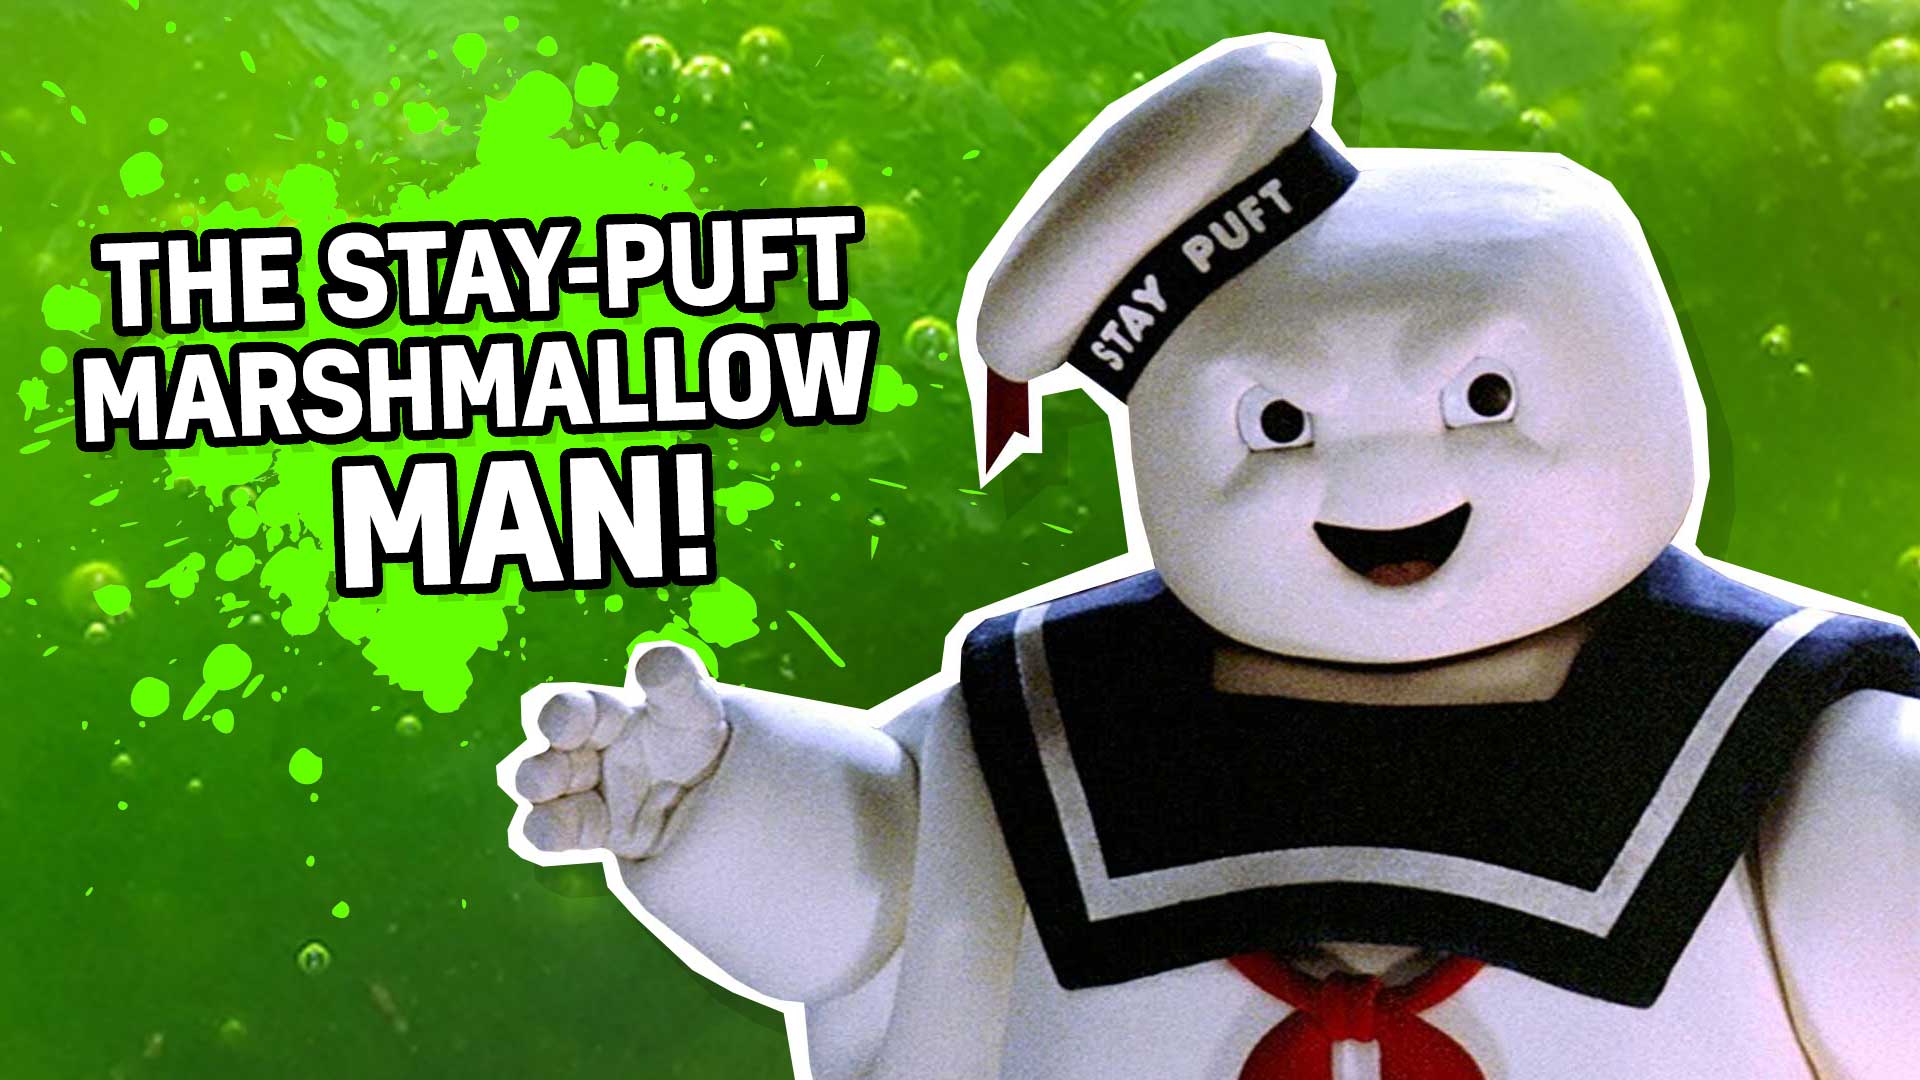 Result: The Stay-Puft Marshmallow Man